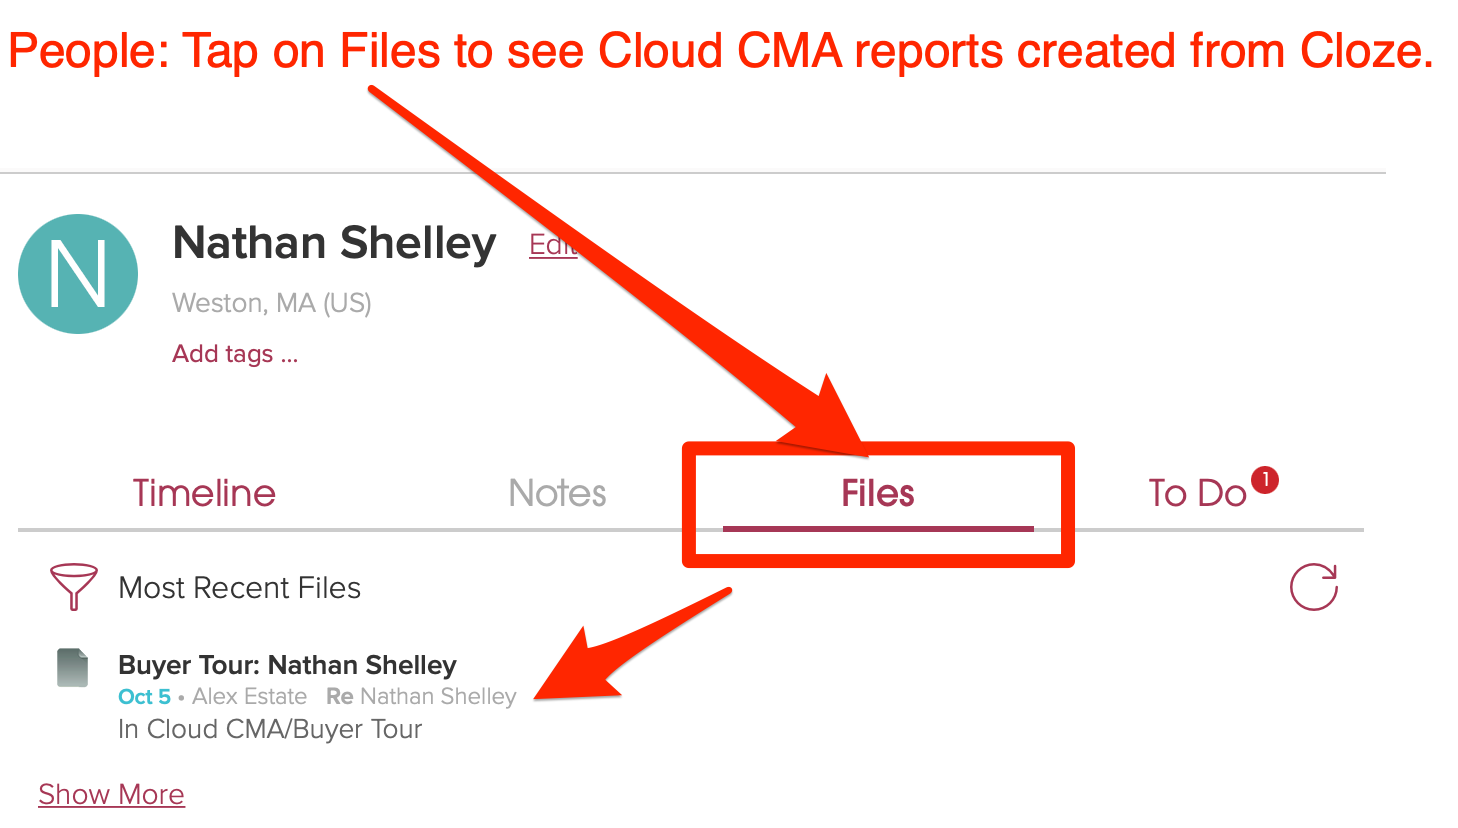 Tap on Files to see Cloud CMA reports created from Cloze on a person. 